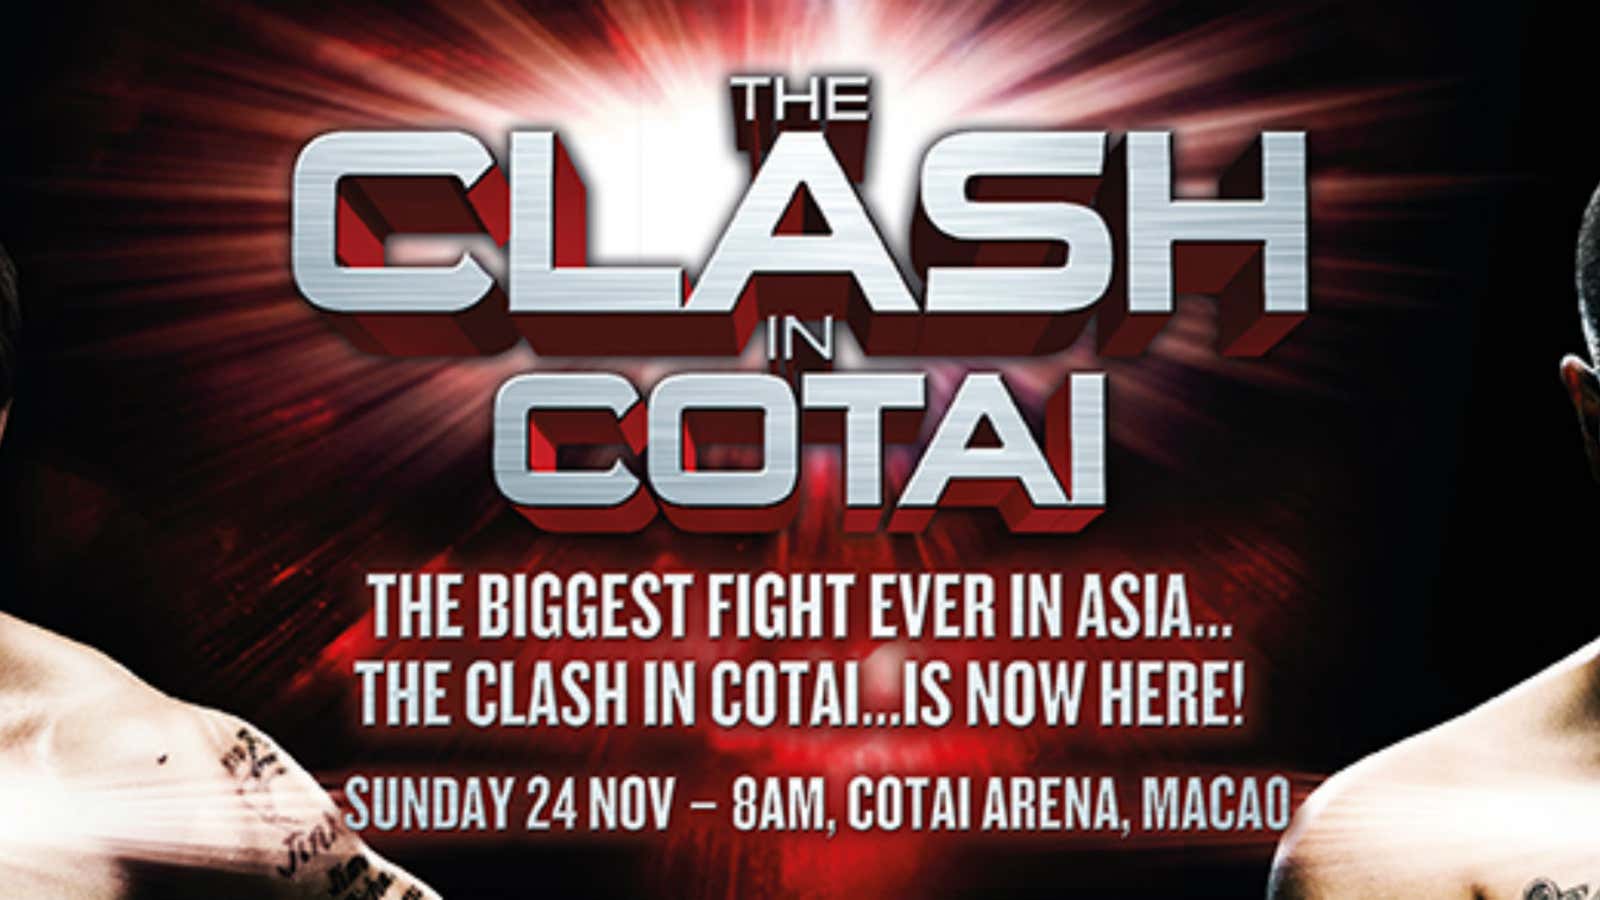 Macau’s “Clash in Cotai” might be a great fight, but a financial disappointment